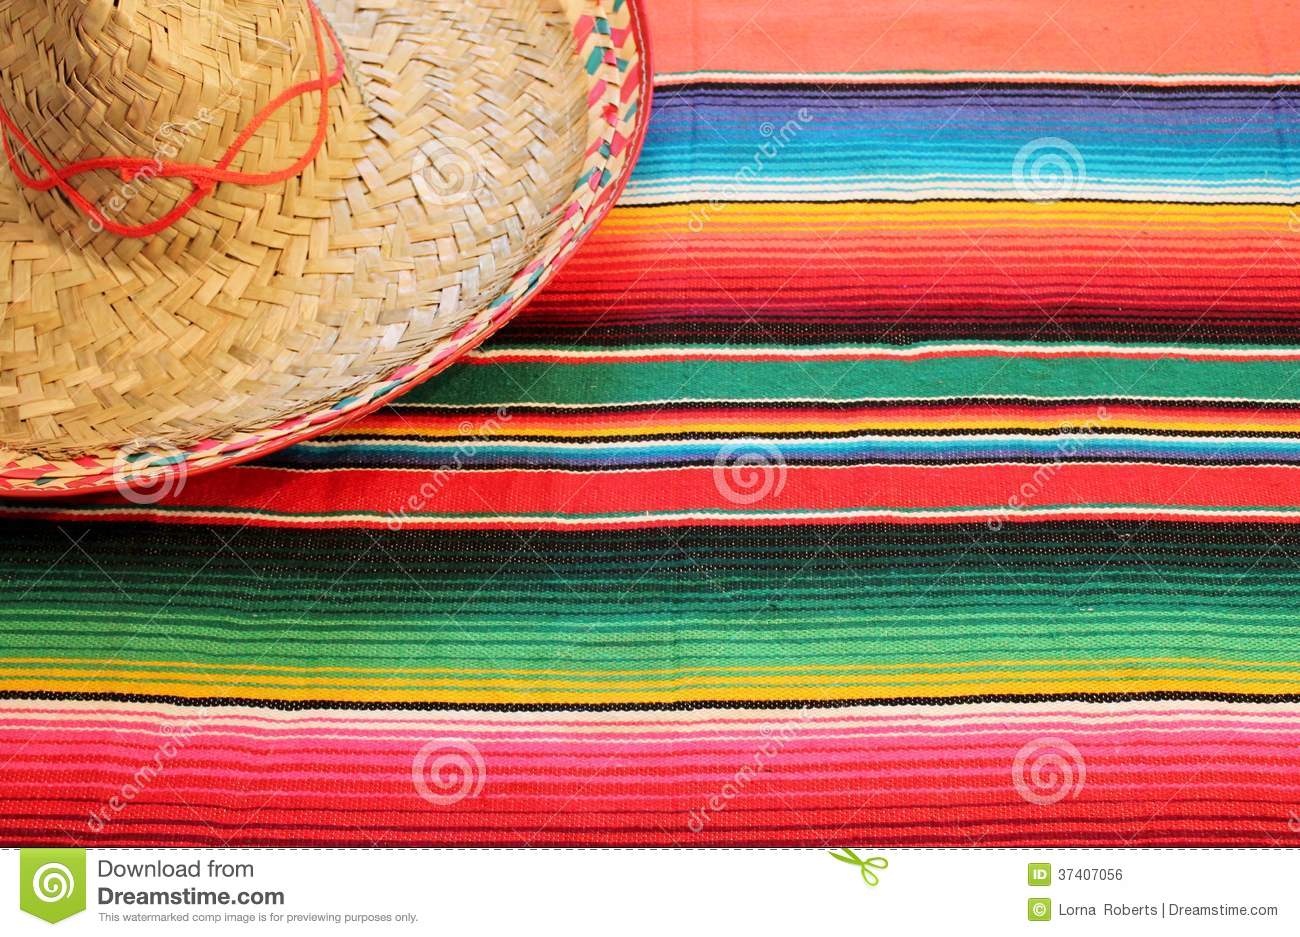 Mexican Fiesta Poncho Rug In Bright Colors With So Royalty Free